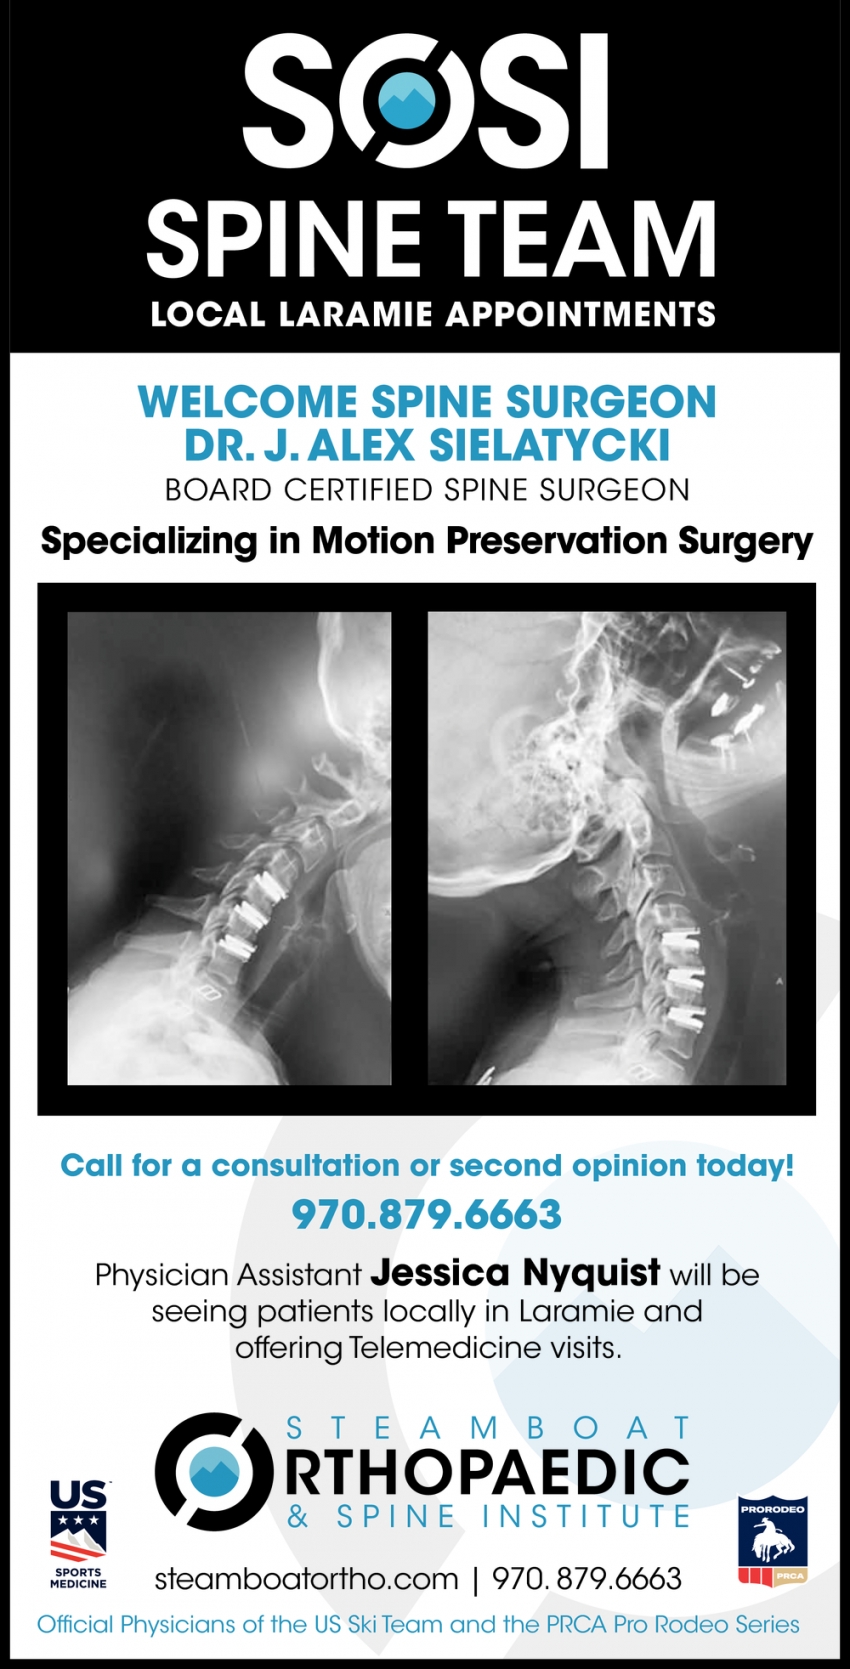 Specializing in Motion Preservation Surgery